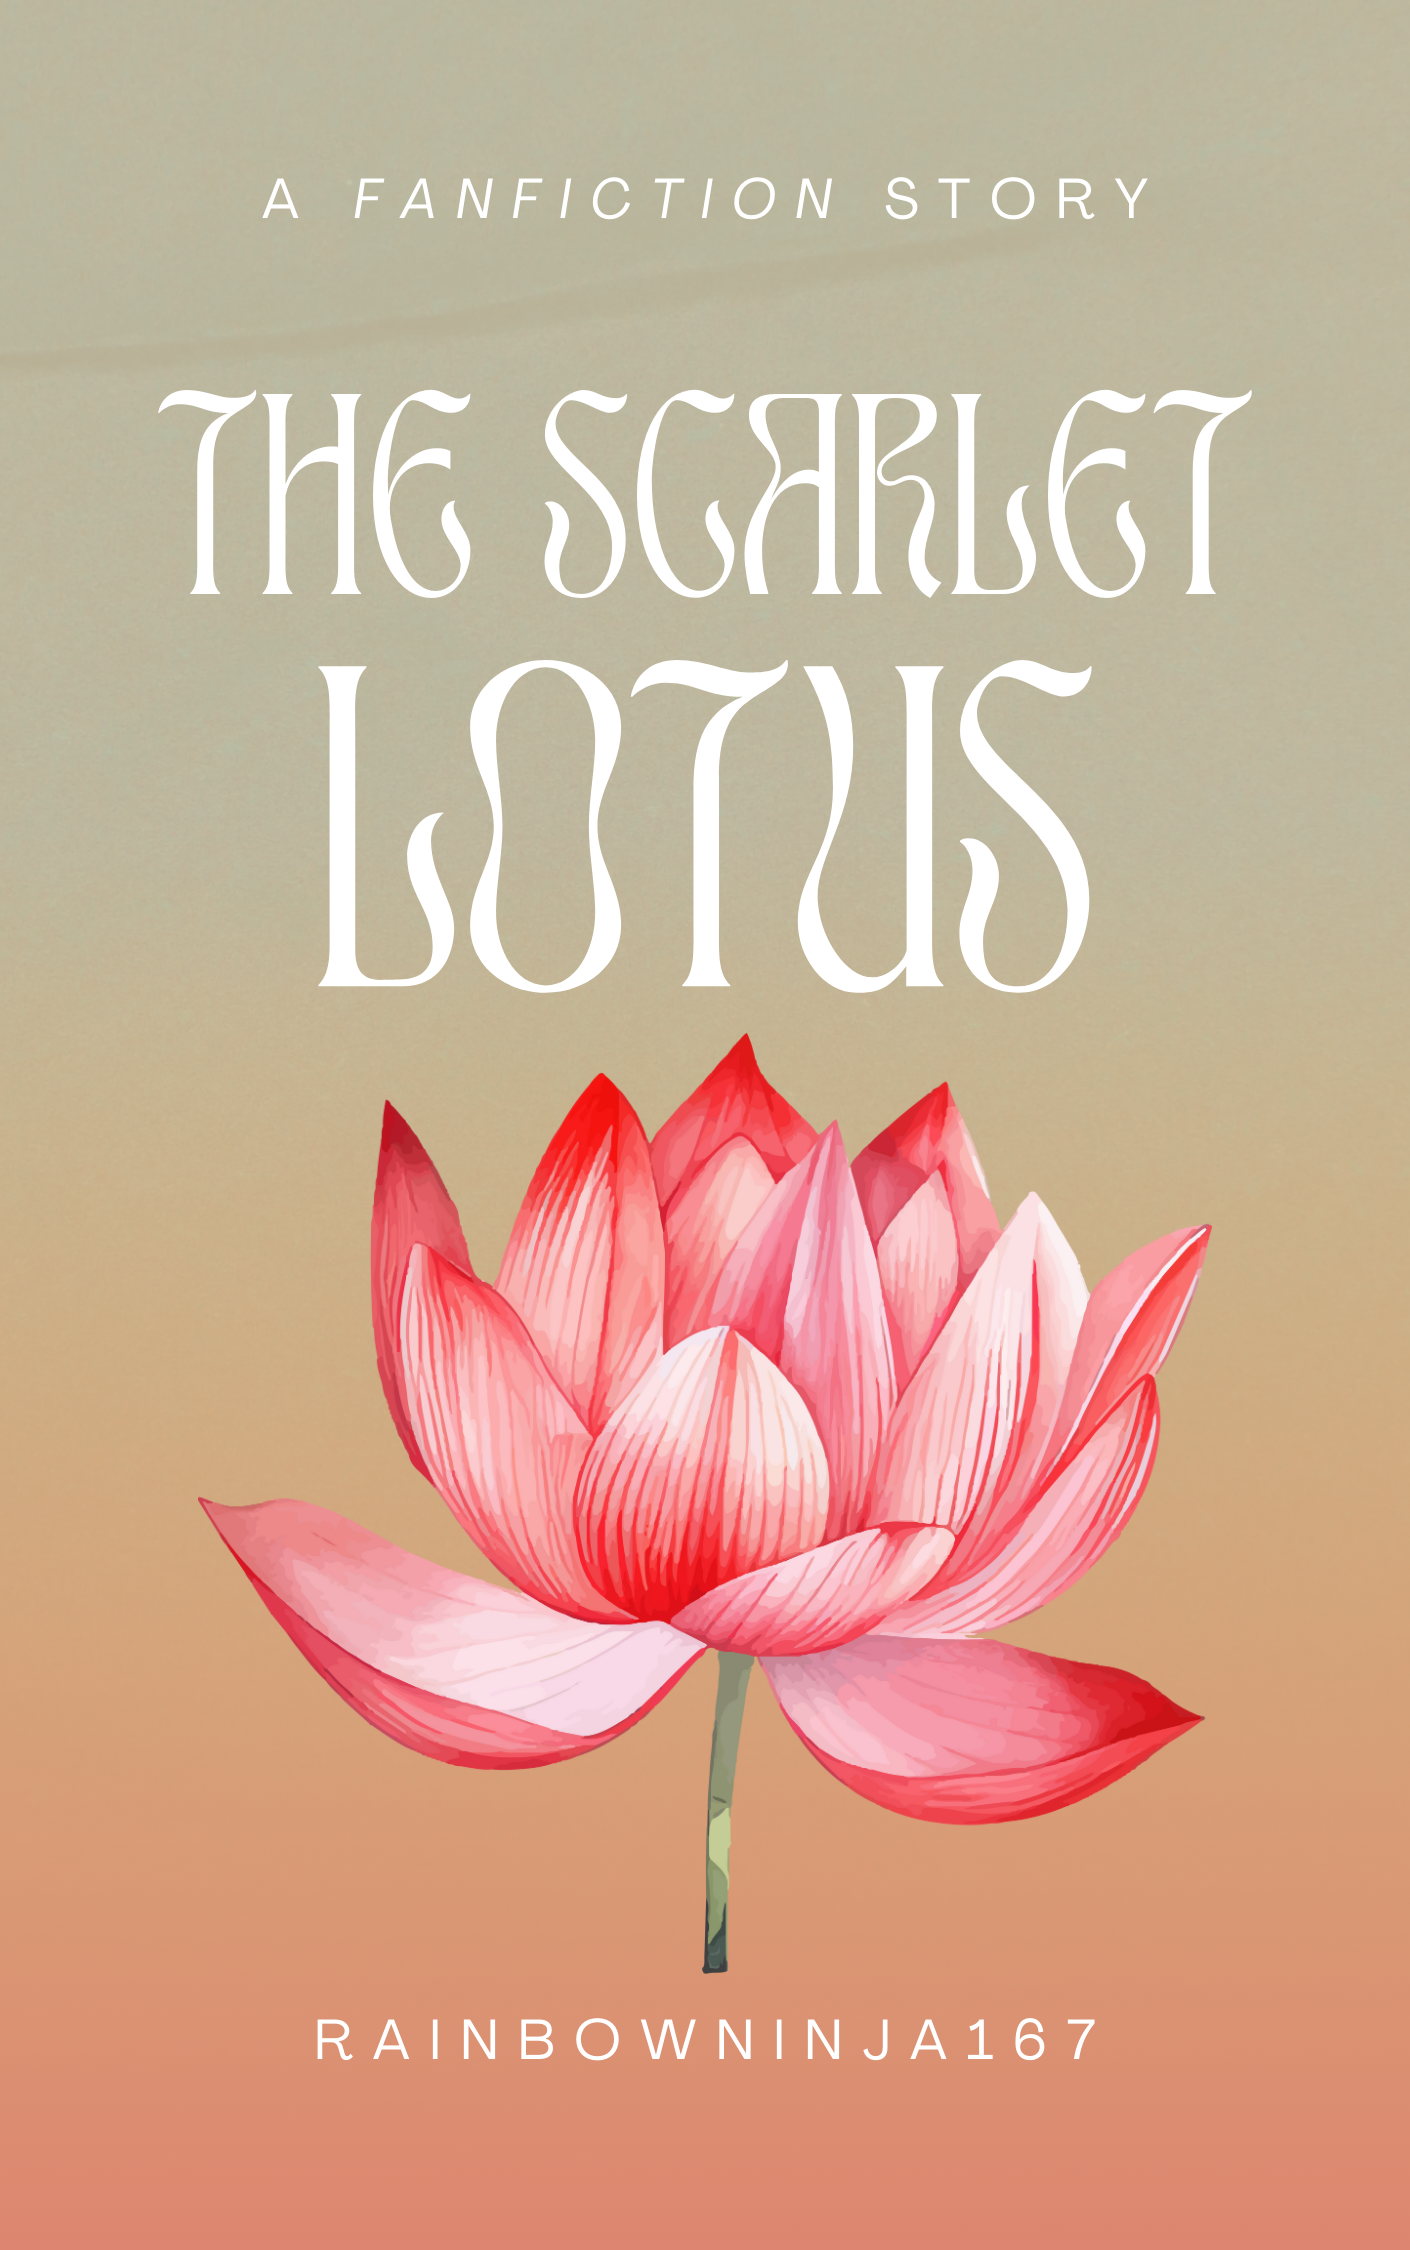 Fan cover of The Scarlet Lotus by rainbowninja167. Background is a drawing of a dark pink lotus flower